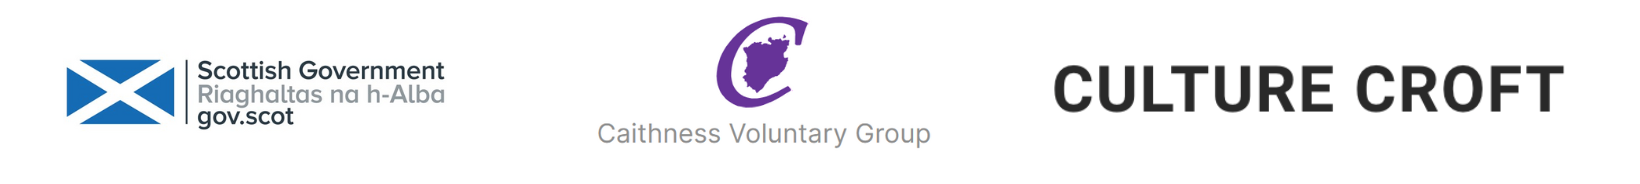 Culture Croft, Caithness Voluntary Group and Scottish Government